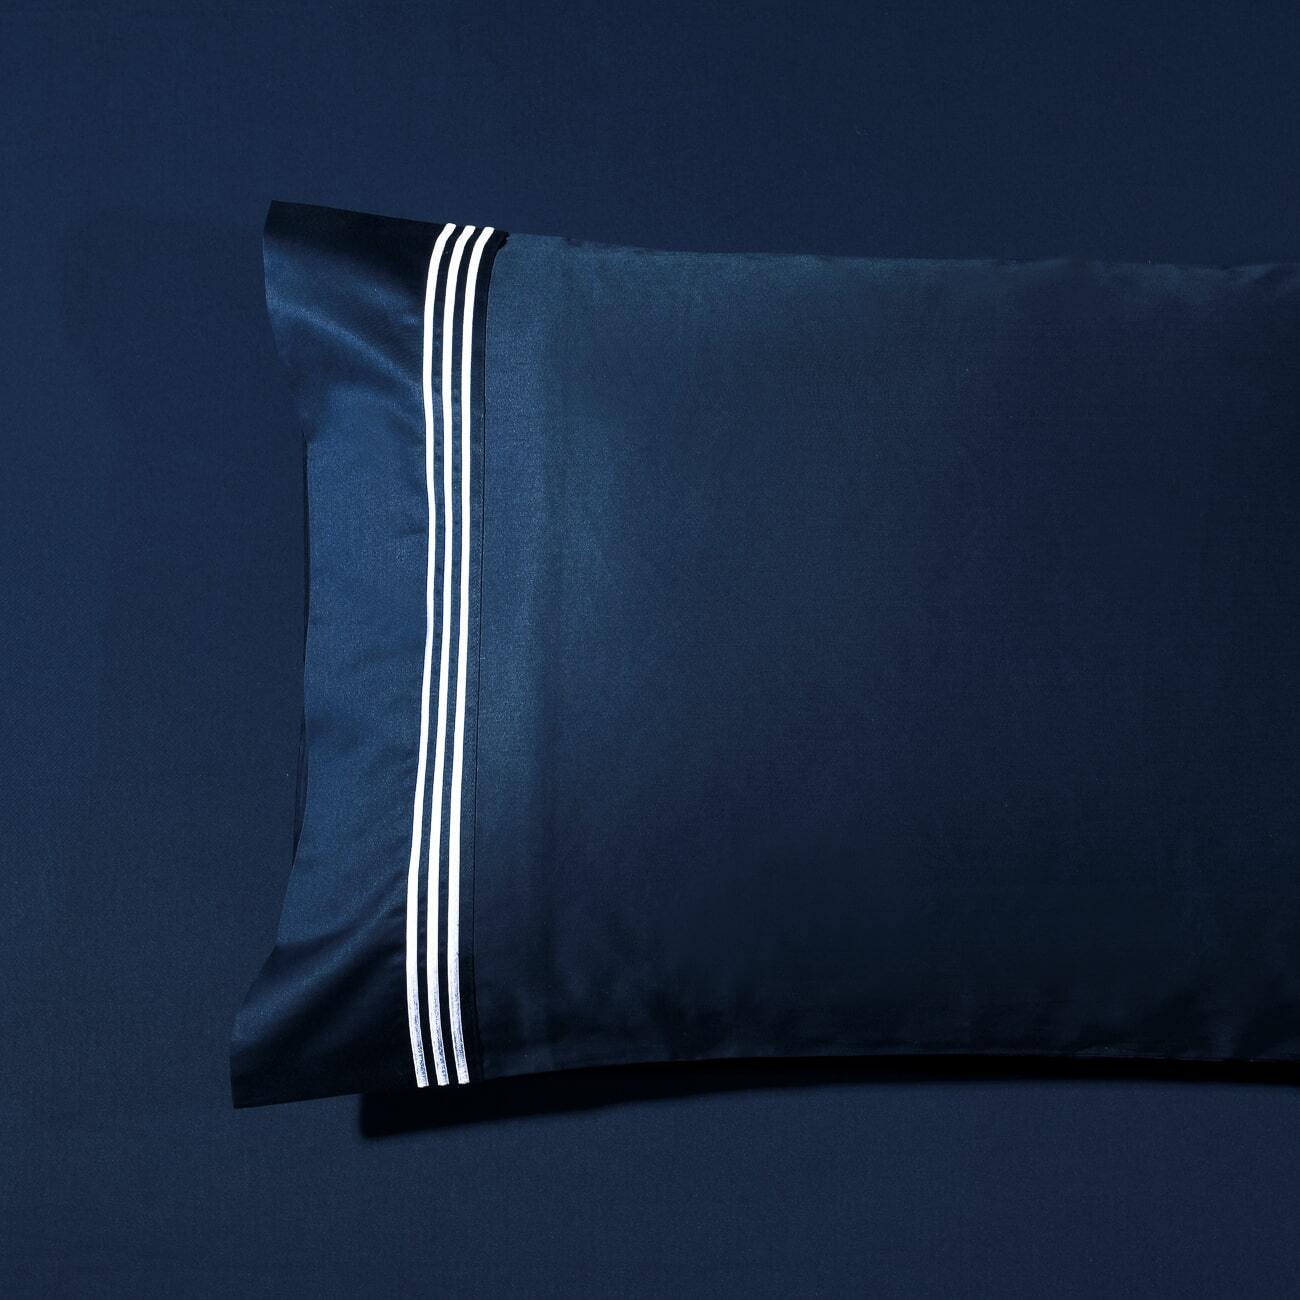 Hotel Luxe 1000TC Sheet Set - Navy Blue with White Embroidery Lines